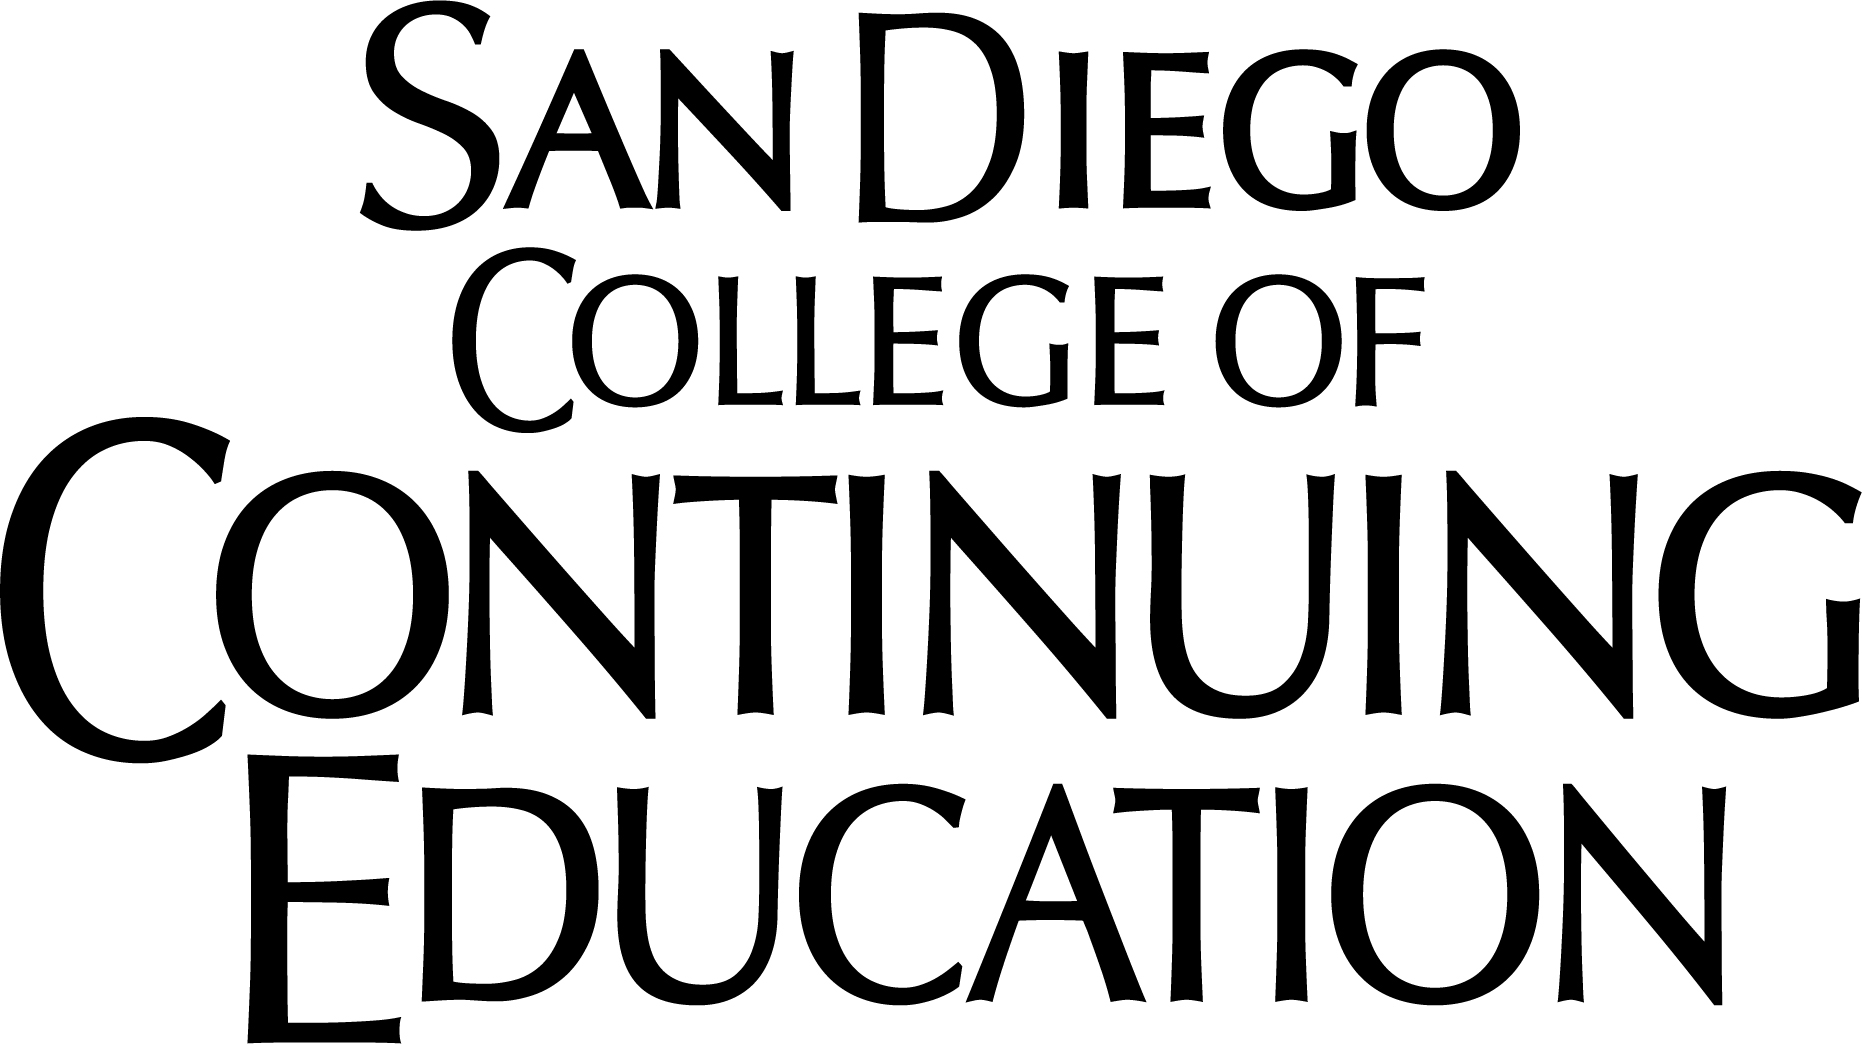 San Diego College of Continuing Education logo